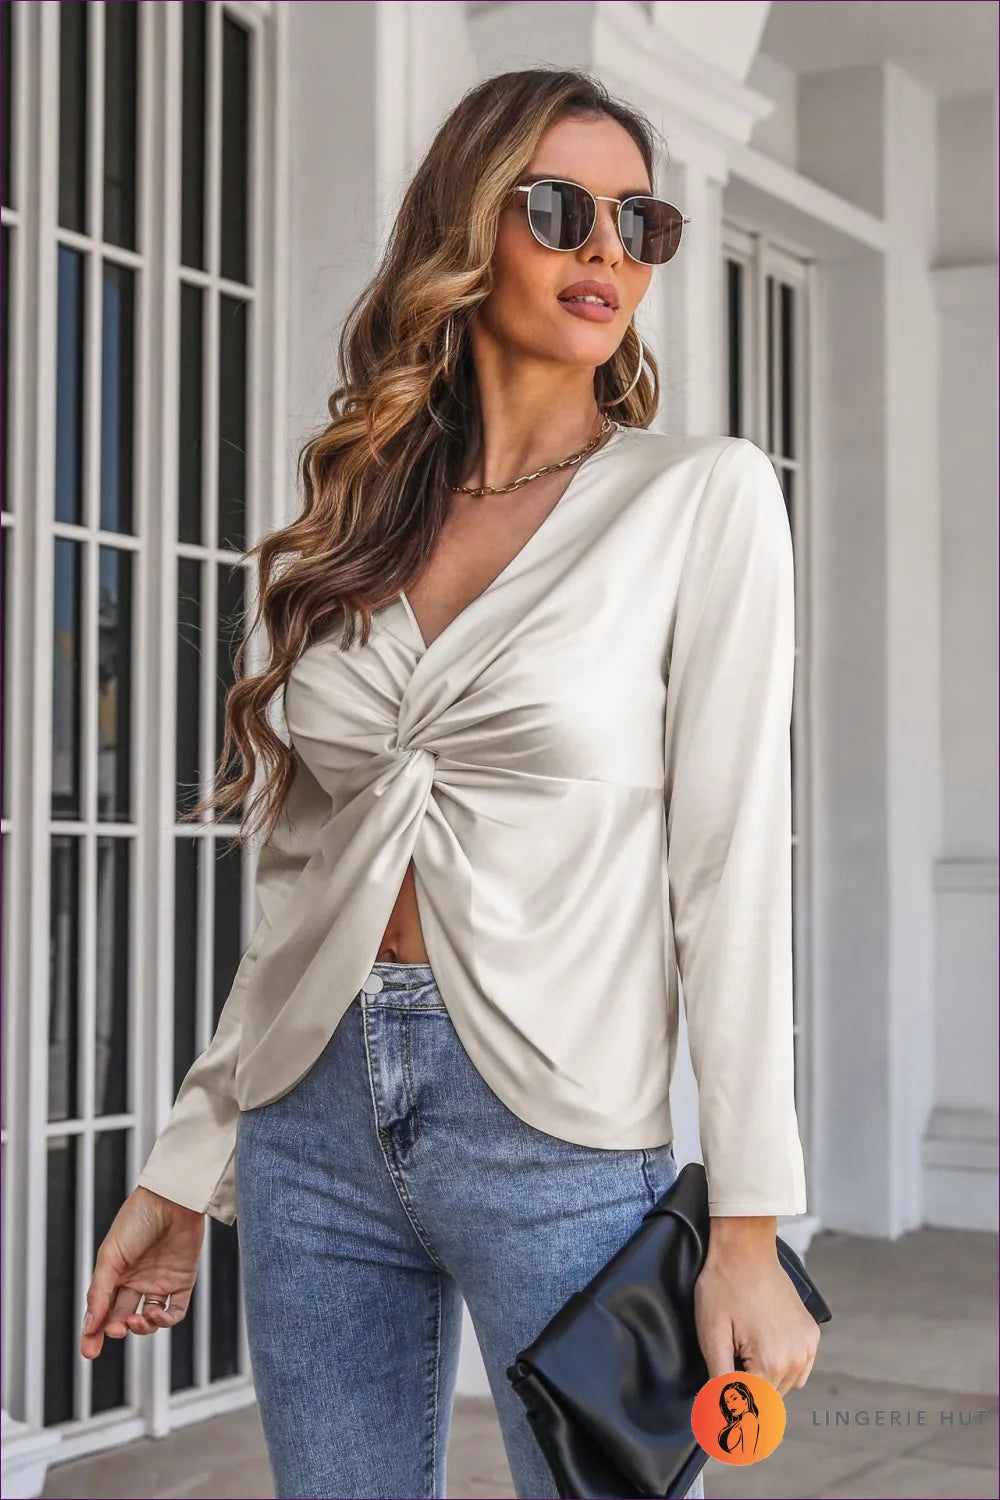 Embrace Elegance And Style With Our Twisted Satin V-neck Shirt. Limited Stock Available! Styling Tip This